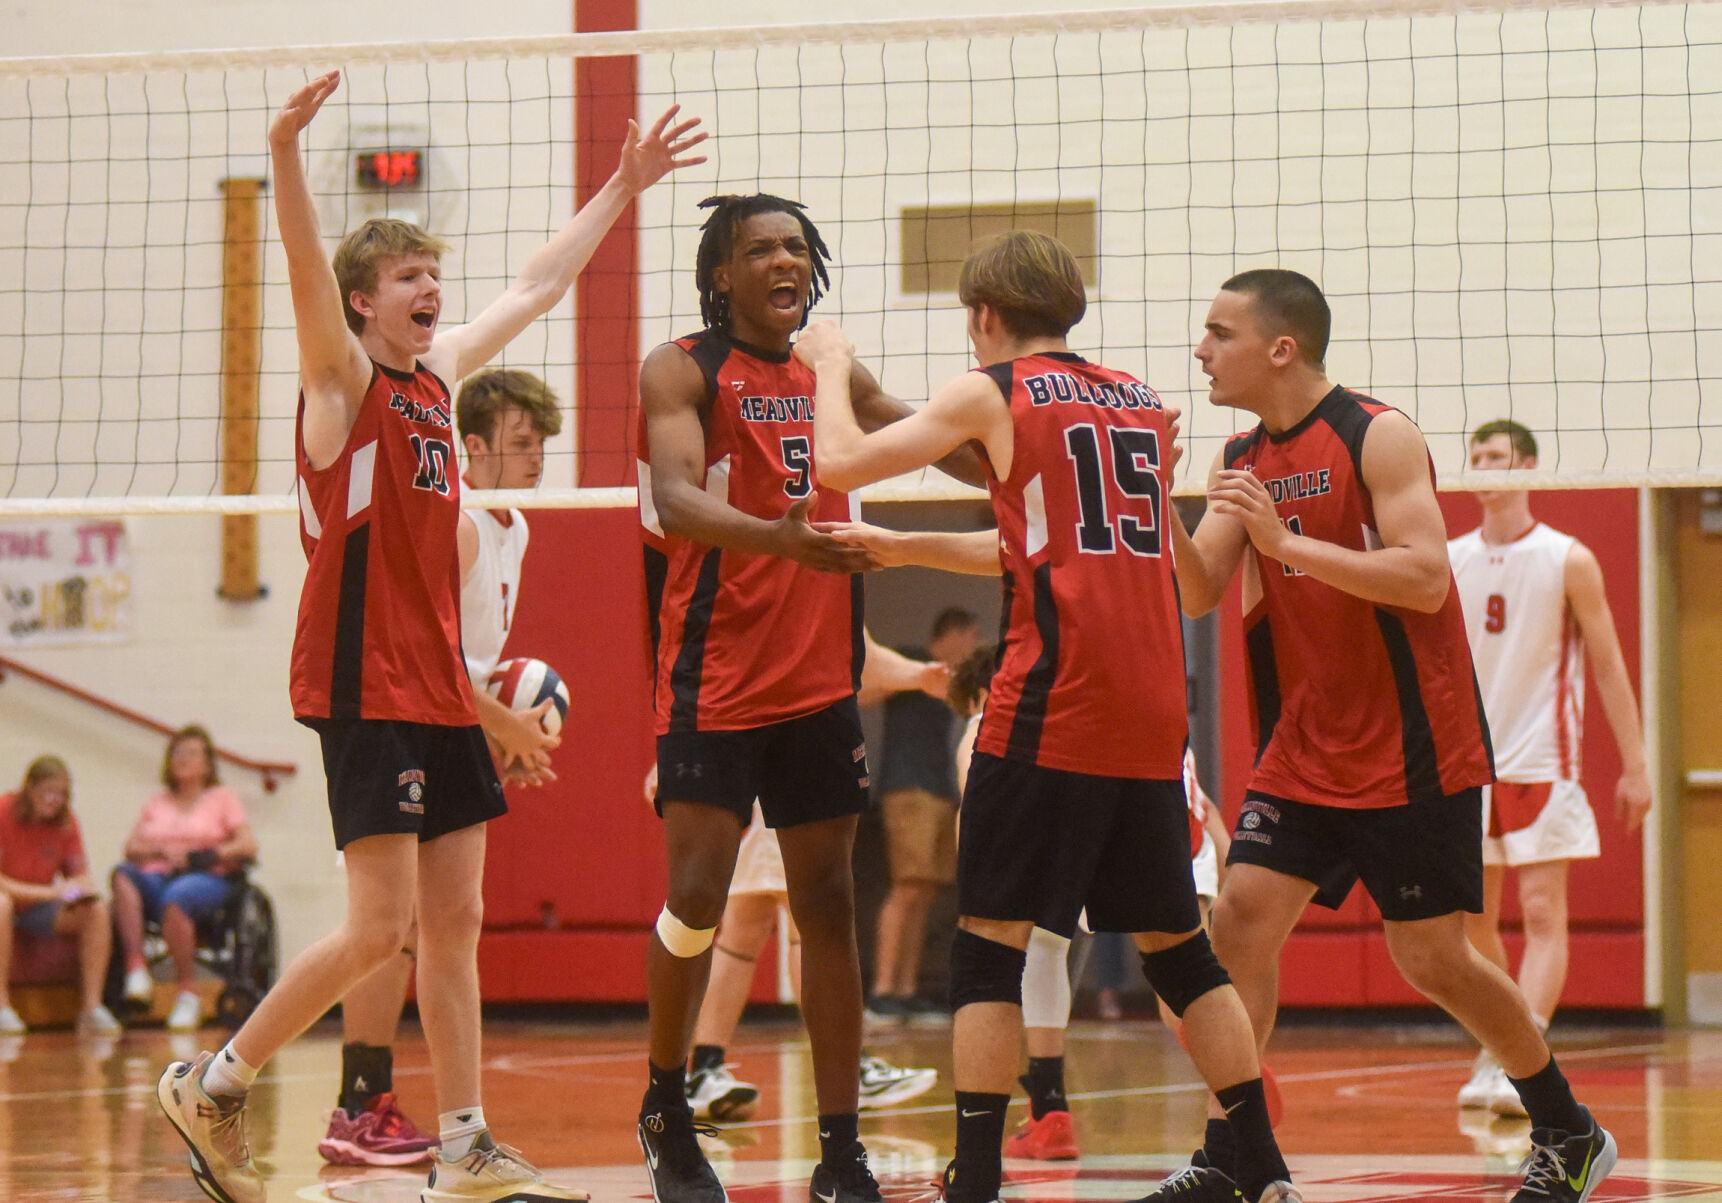 Meadville Boys Volleyball Overcomes Slow Start to Beat Cochranton 3-1 and Secure Top Seed in D-10 Tourney